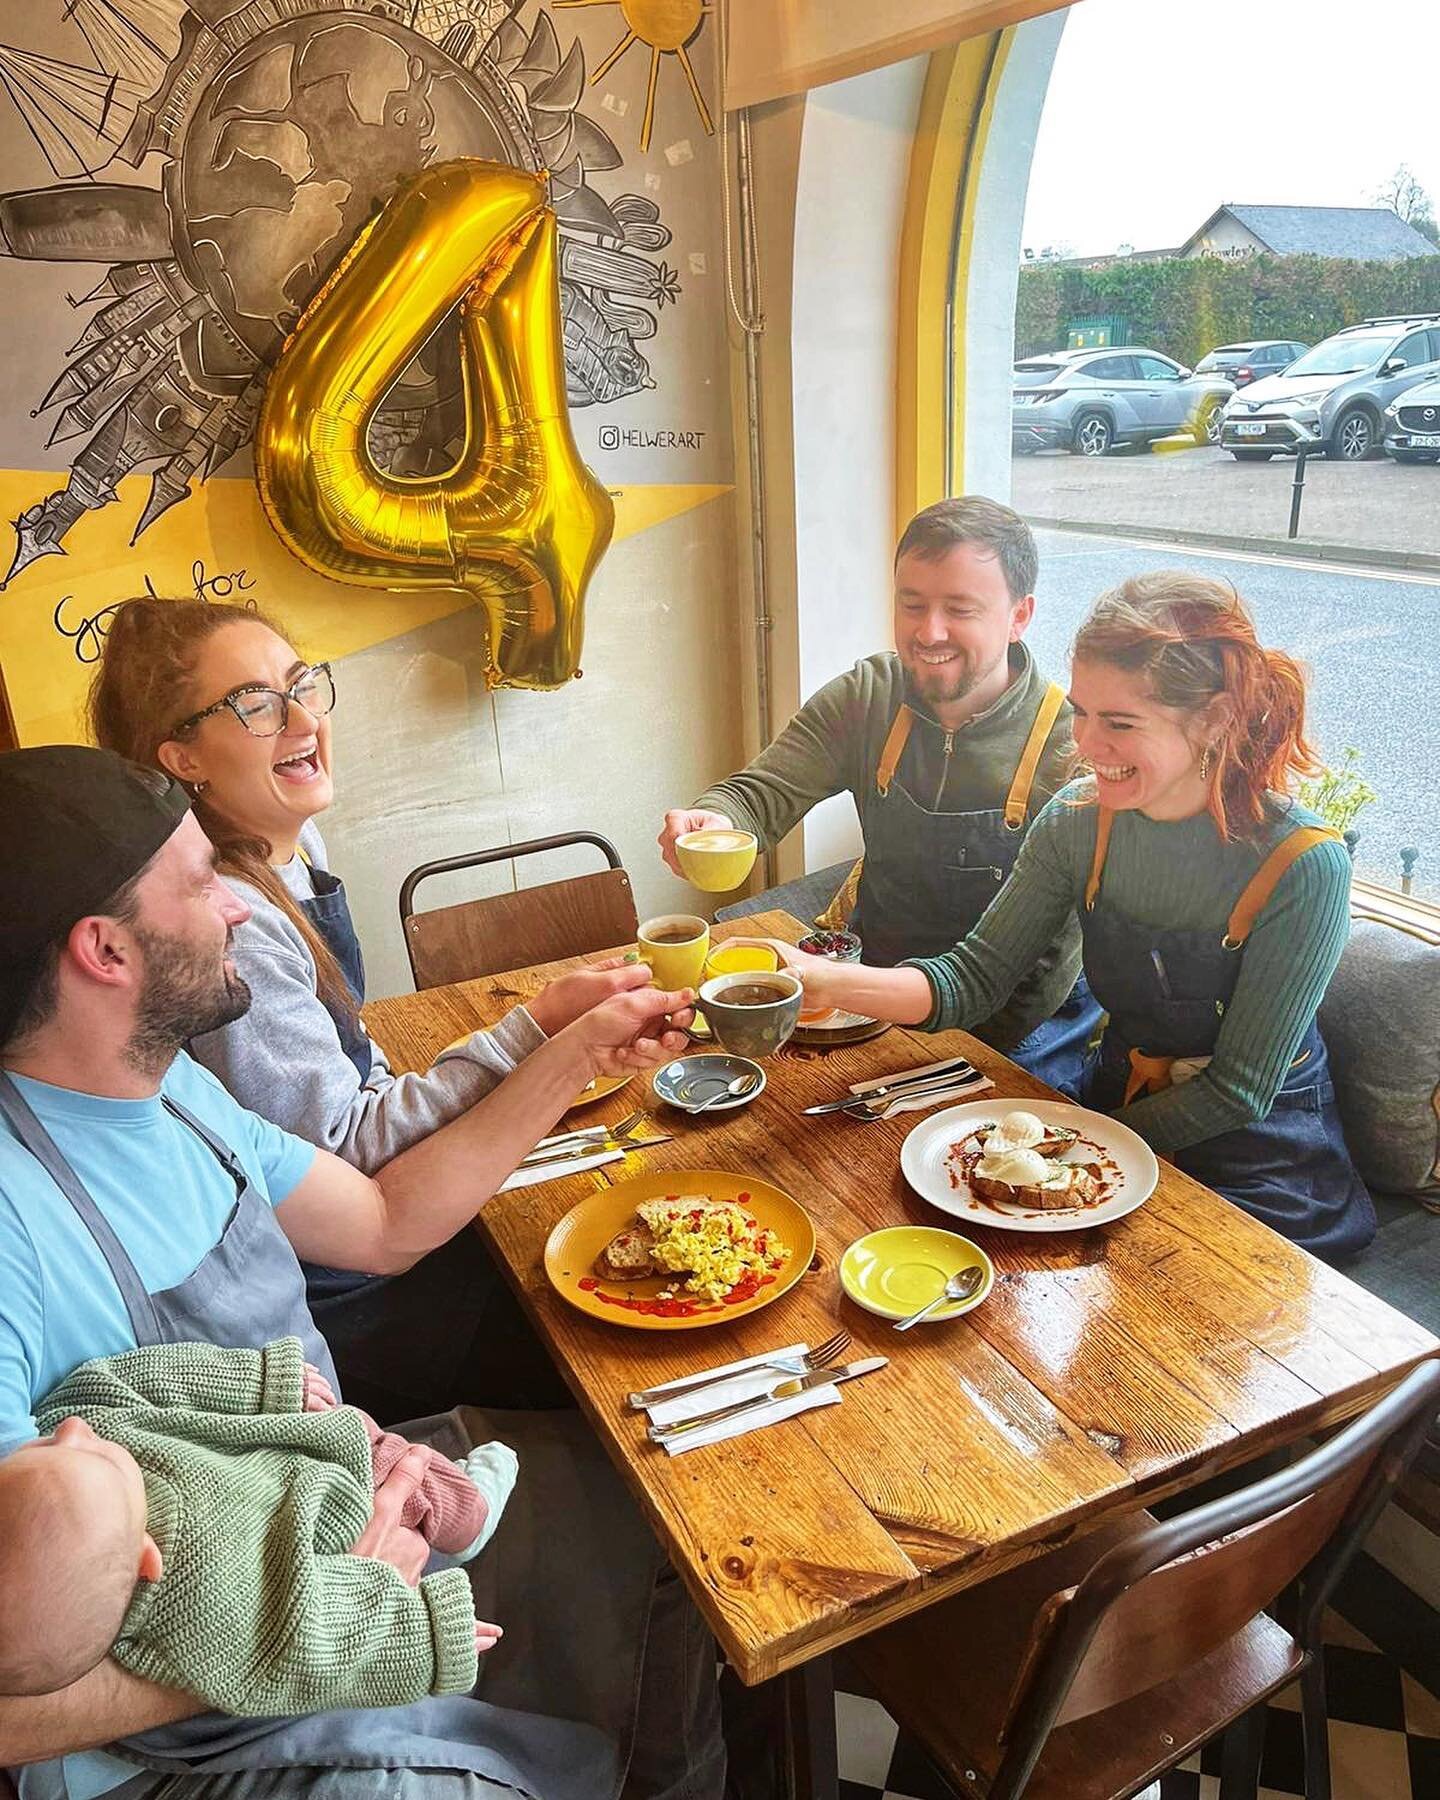 Share our birthday wish with us as we celebrate 4 wonderful years of GFTS! Win brunch for you and three of your best pals.
We are so grateful for a wonderfully supportive community here in Ballincollig and beyond and want to share the love. We&rsquo;